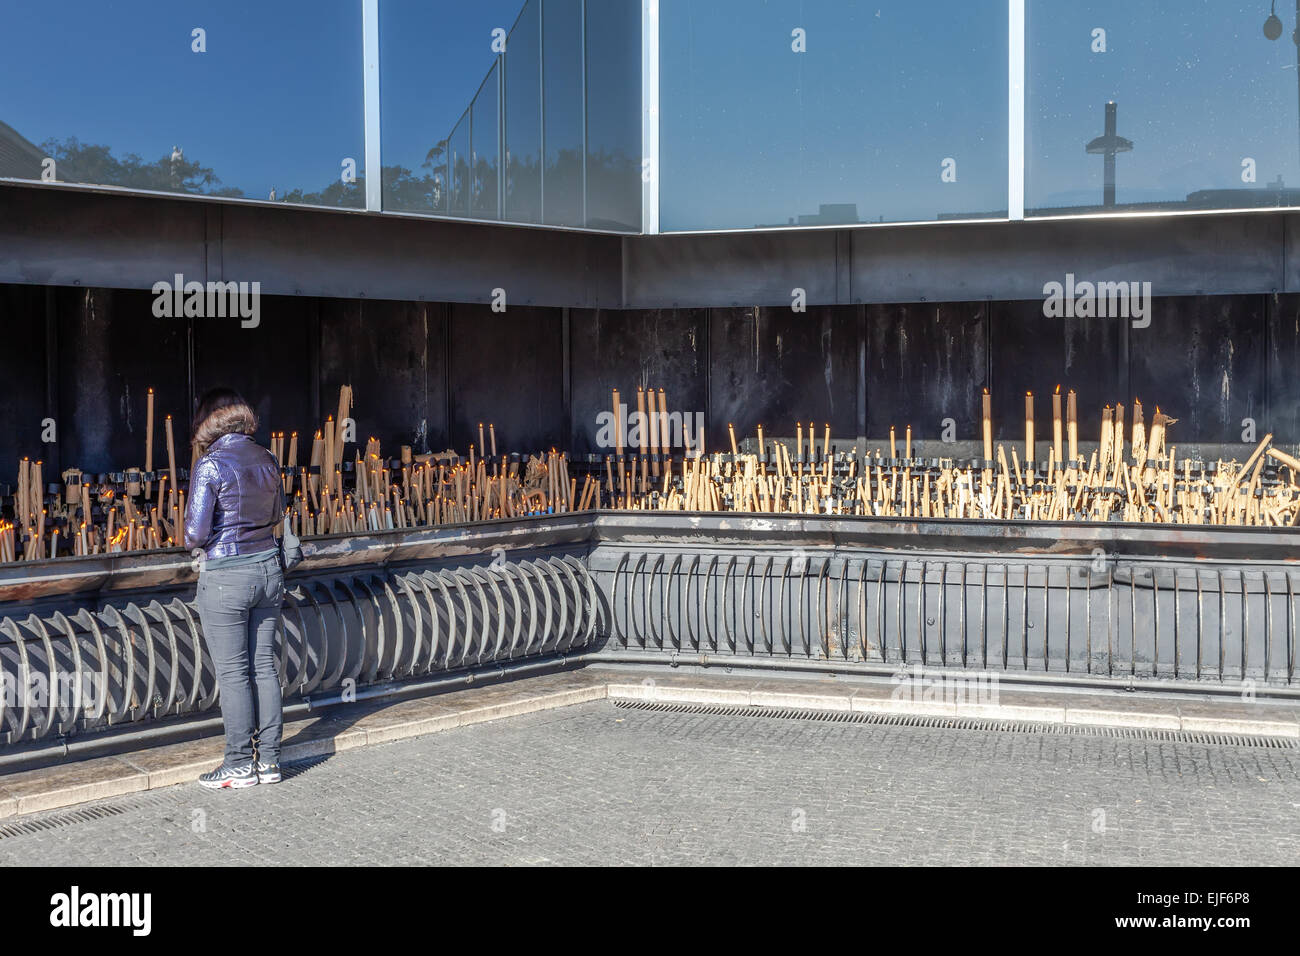 Sanctuary of Fatima, Portugal. Pilgrims burning votive candles as fulfillment of vows made to Our Lady. Stock Photo